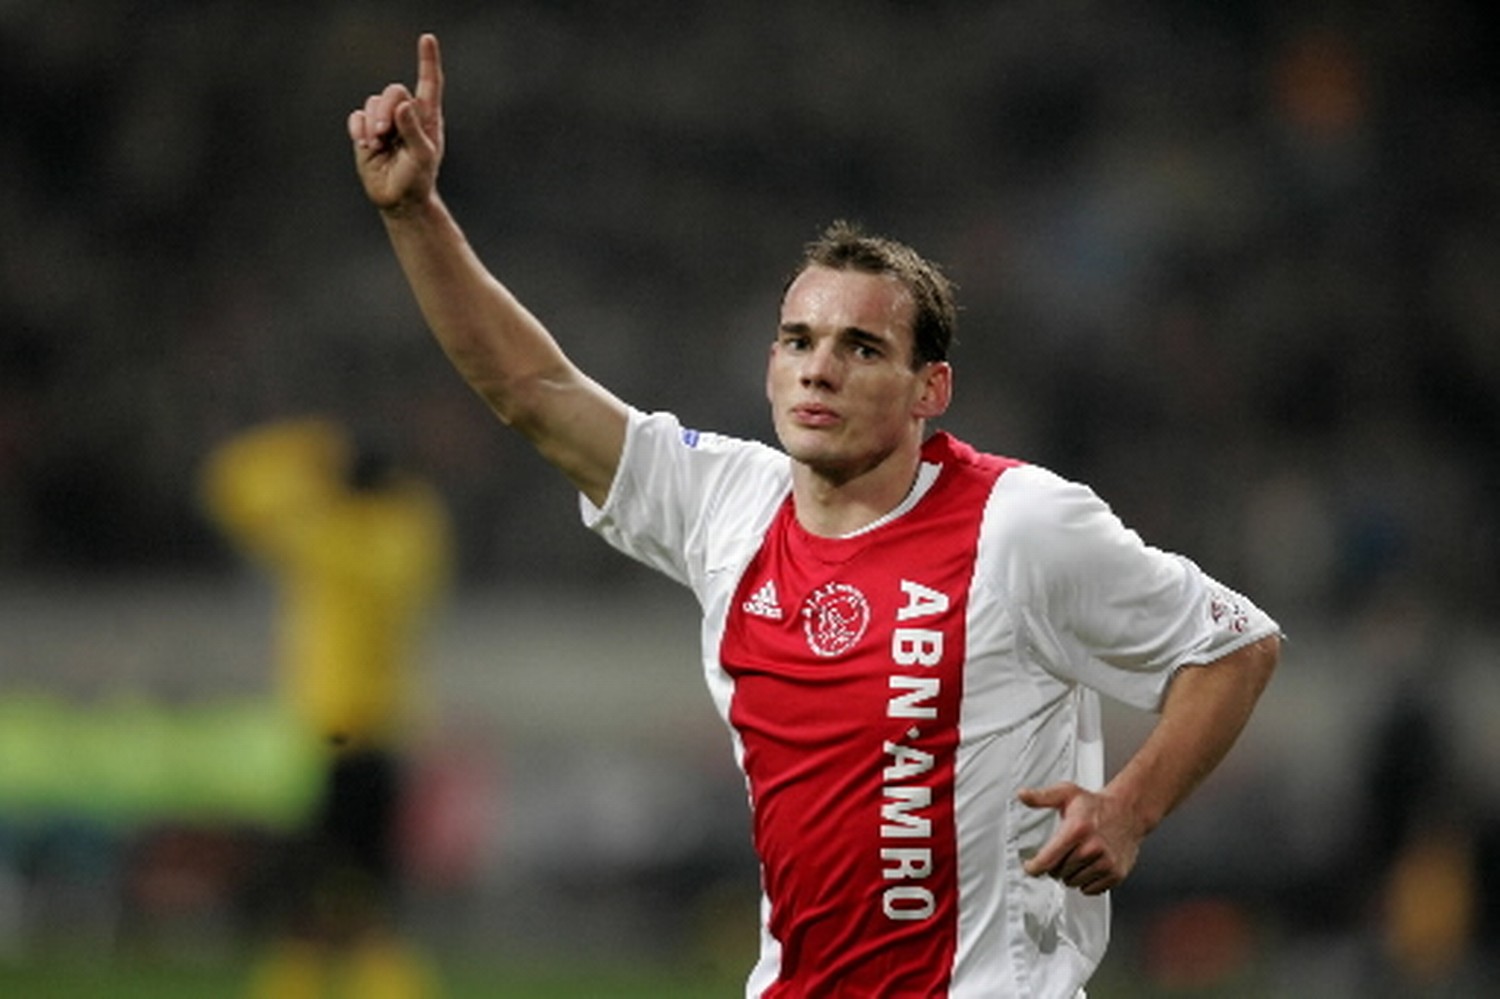 Top 10 Ajax Amsterdam Most Expensive Football Players (2004 - 2022) 